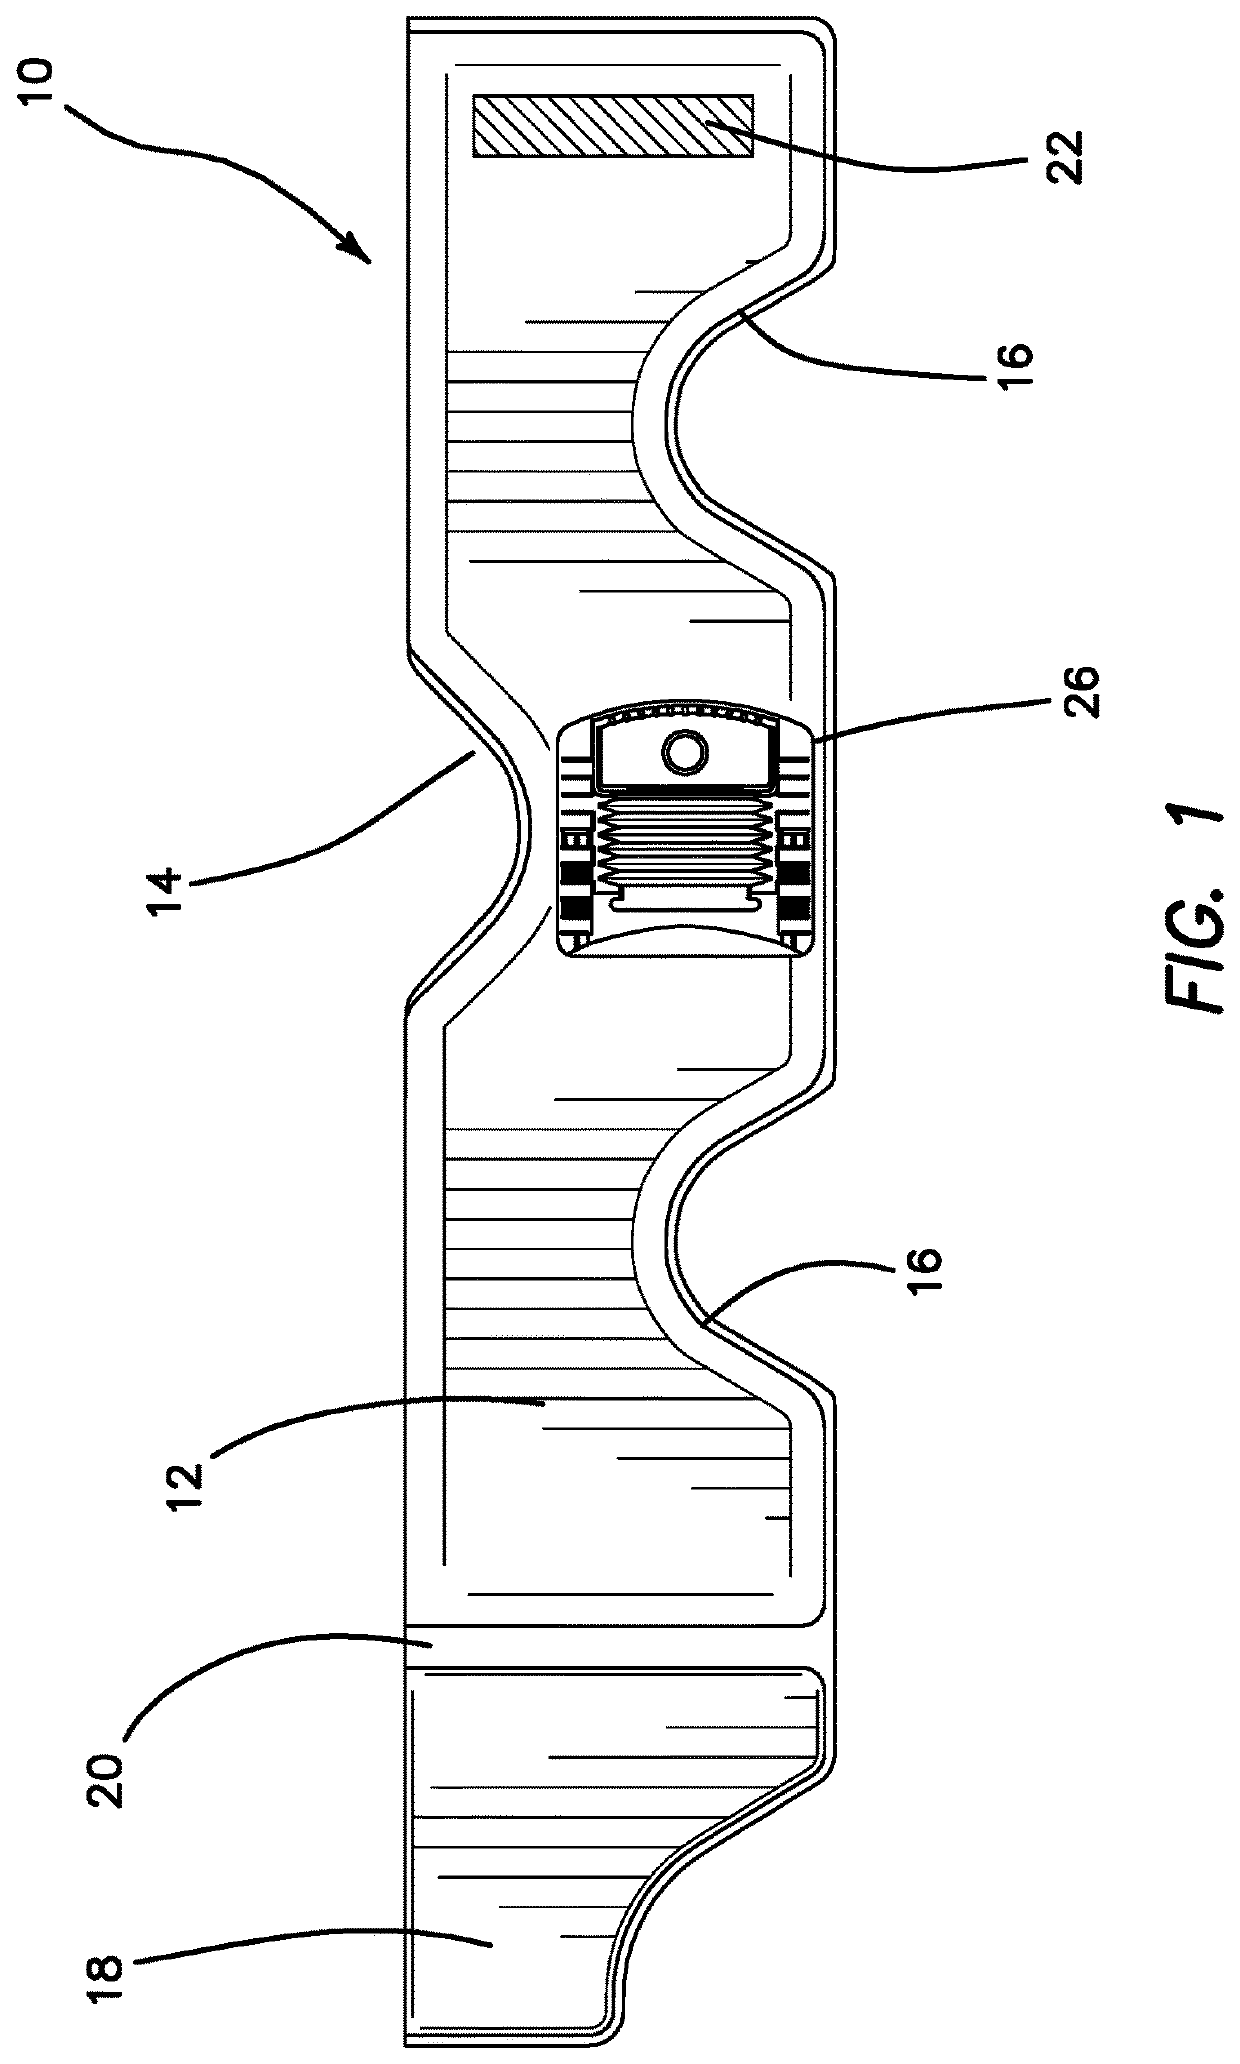 Vacuum splint apparatus for accessing the neck of a patient and method for using the same